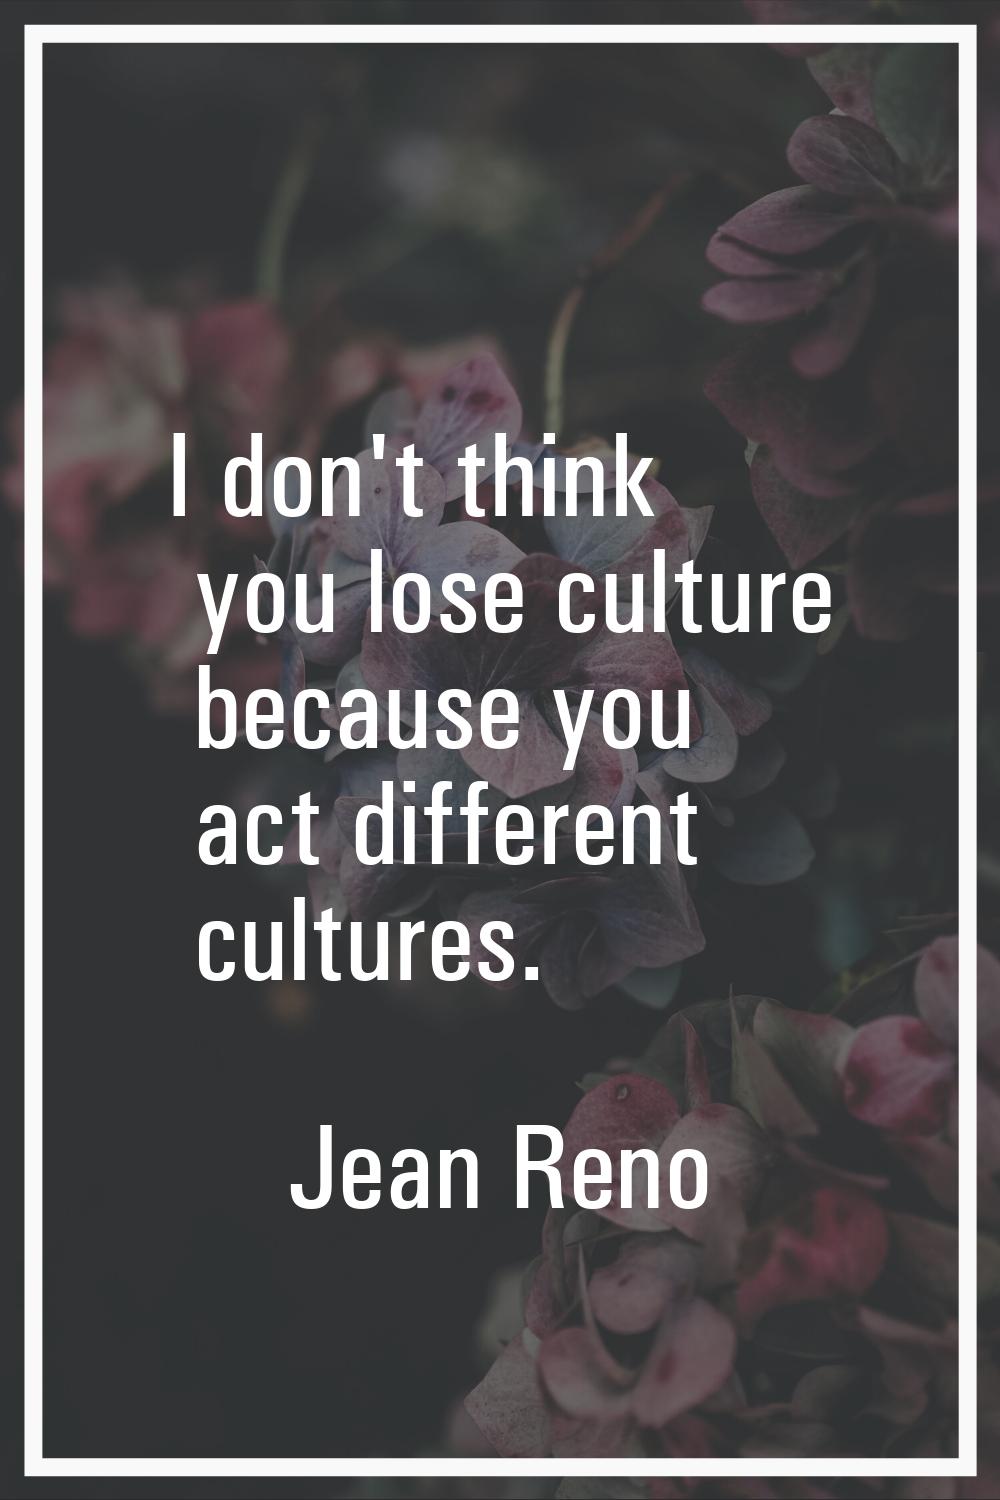 I don't think you lose culture because you act different cultures.